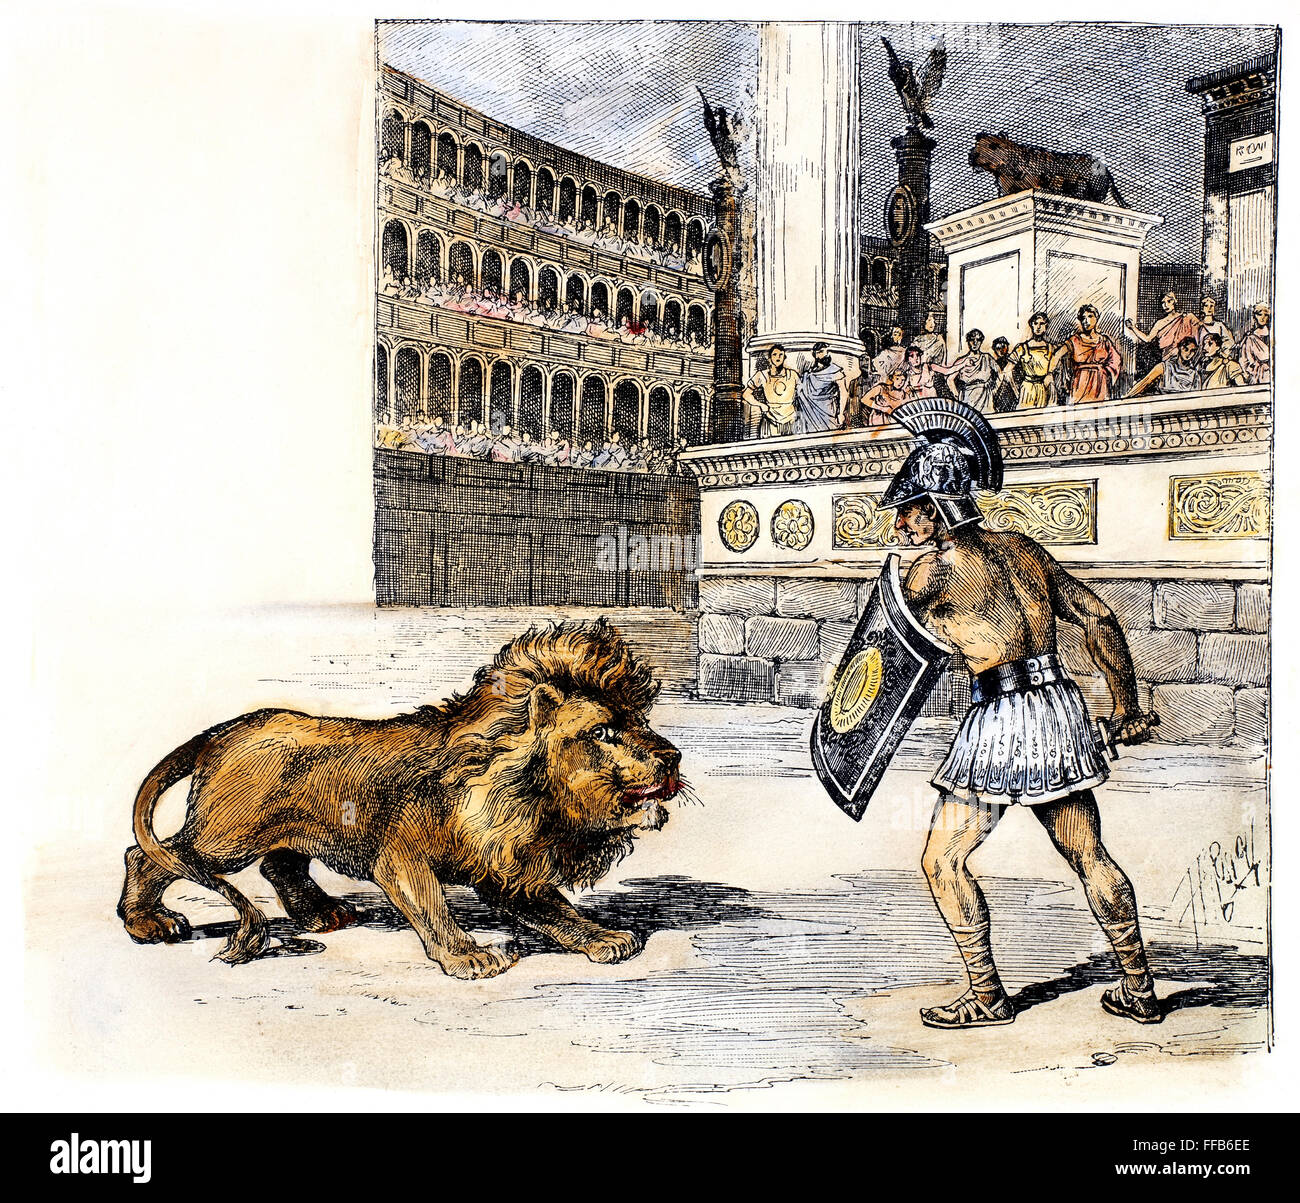 LION & GLADIATOR. /nContest between a lion and a condemned criminal in the arena in ancient Rome. Line engraving, American, 1892. Stock Photo